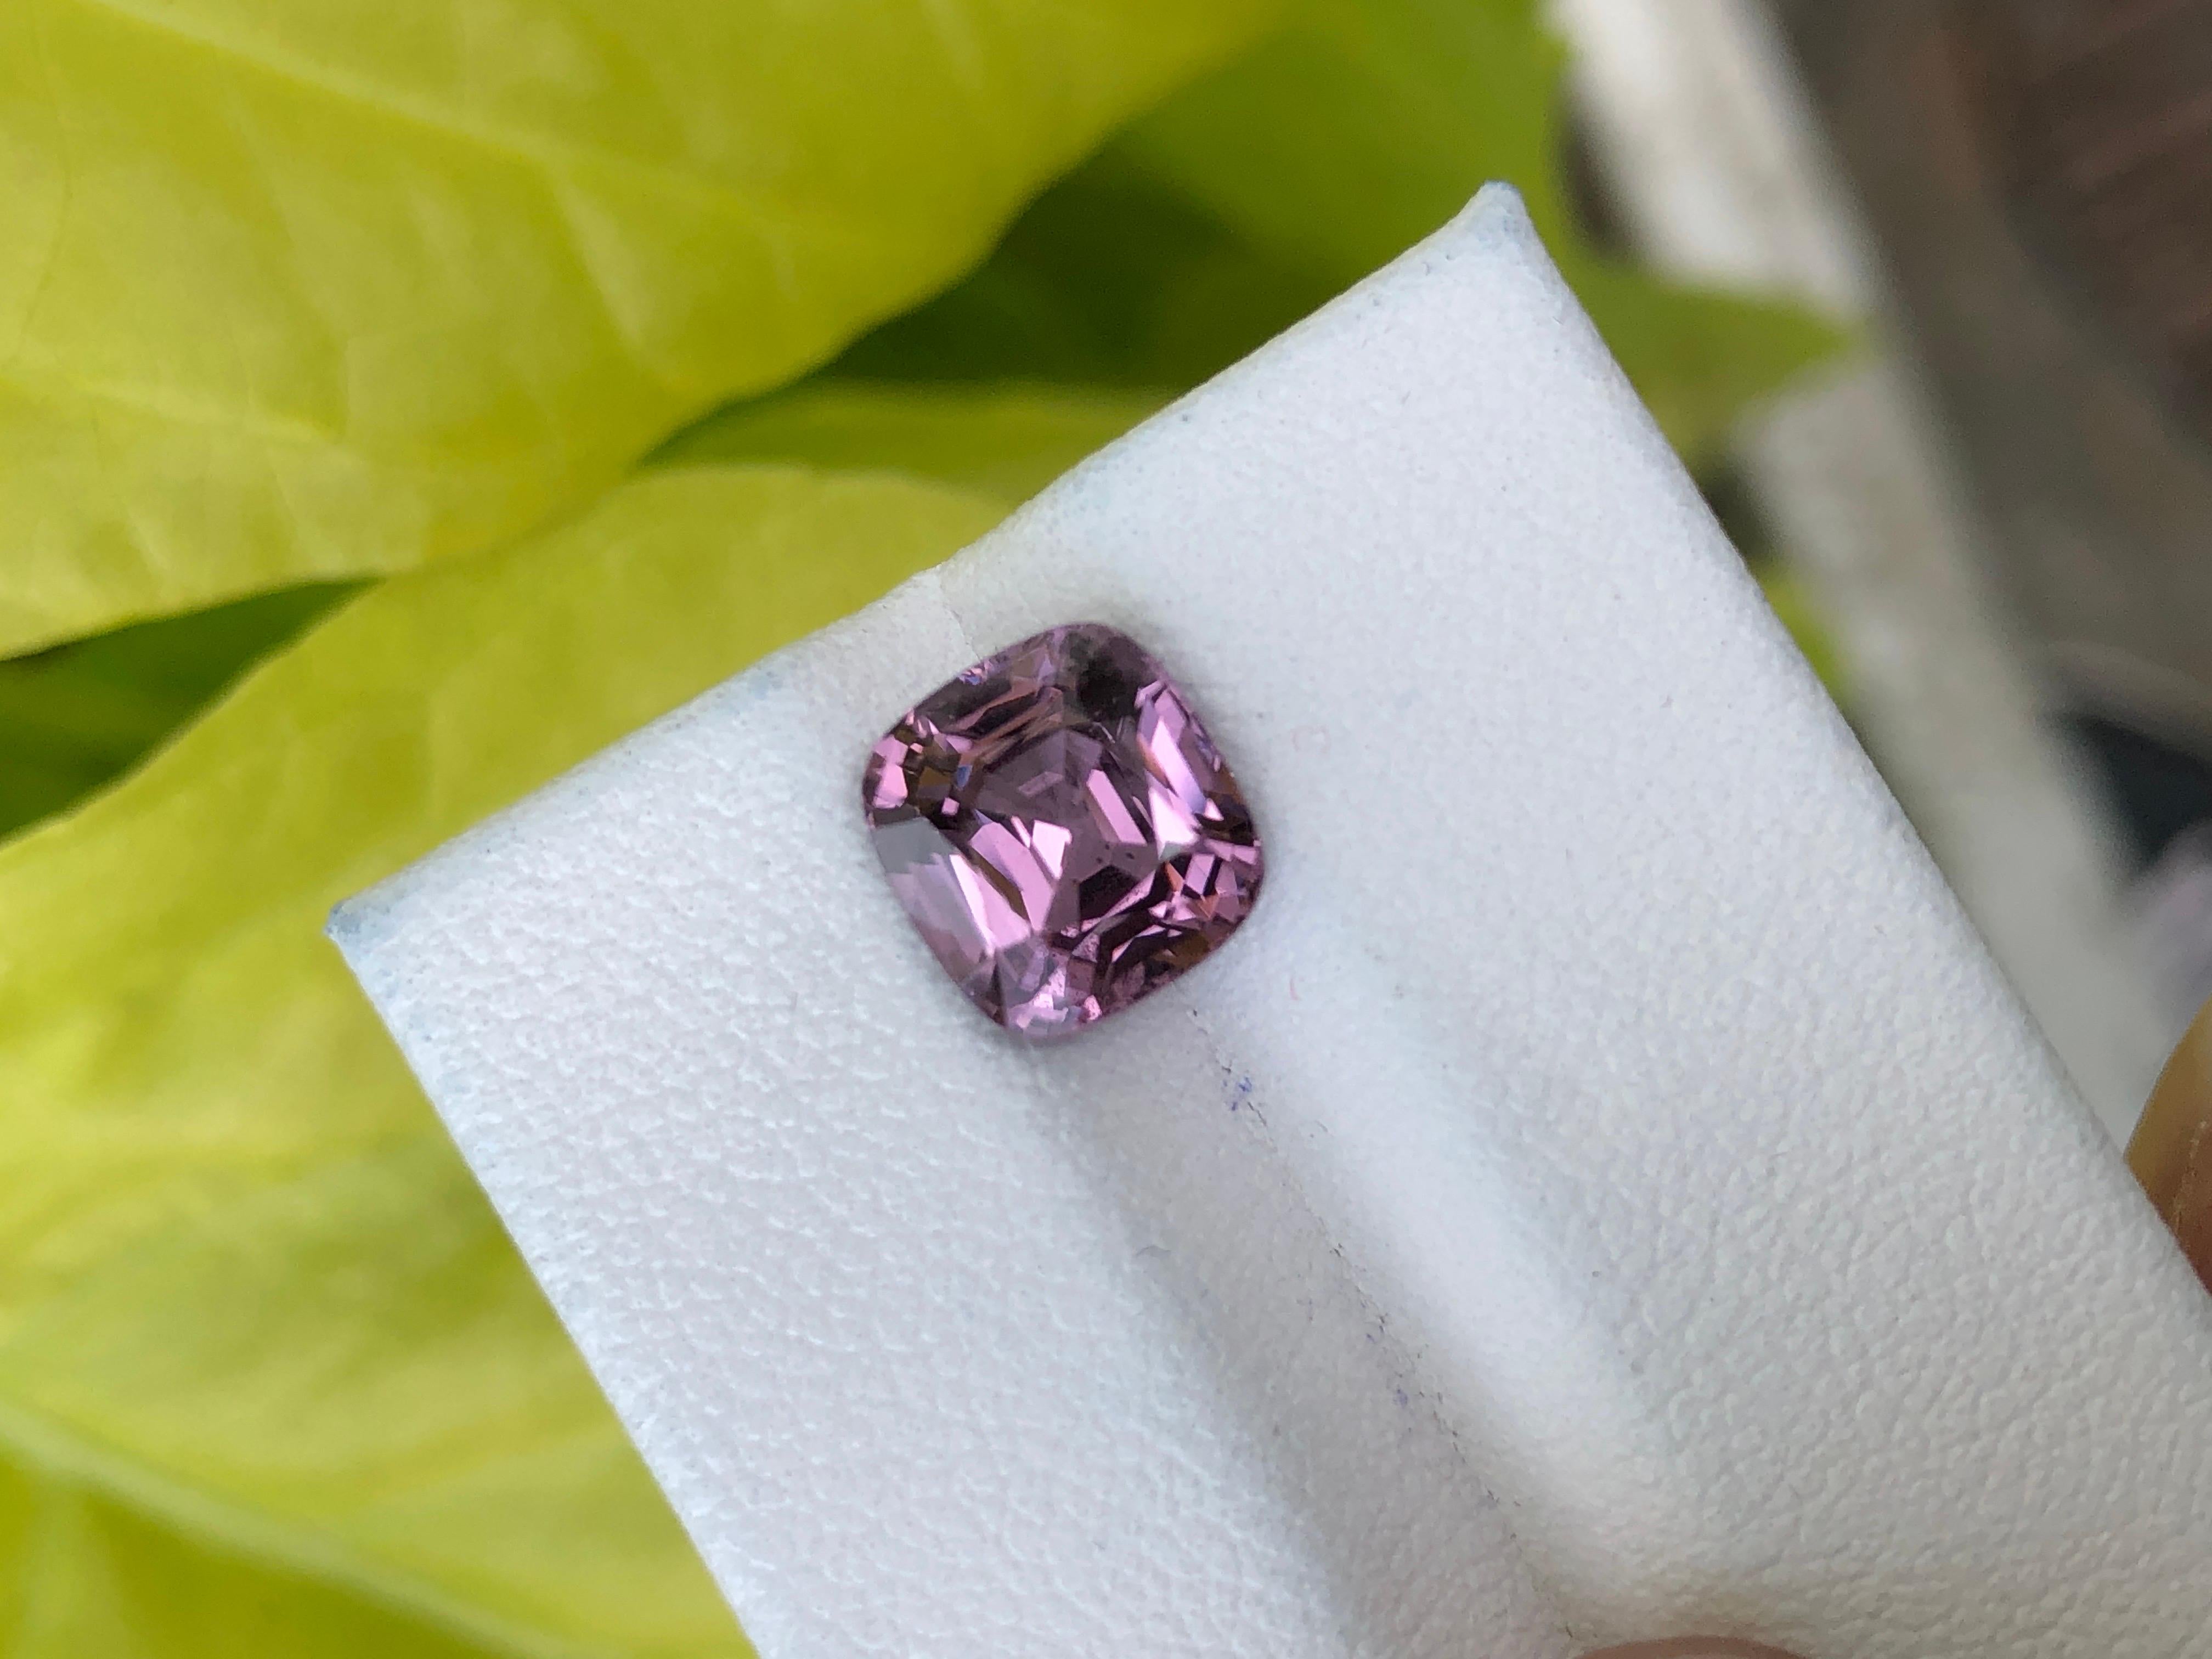 Introducing the mesmerizing Lavender Spinel 2.99 ct : A gemstone masterpiece blending ethereal beauty and serene elegance. Captivating hues dance with grace, adorning your world with enchanting charm.
—————————————
Stone💎:Spinel 
Color💈: Lavender